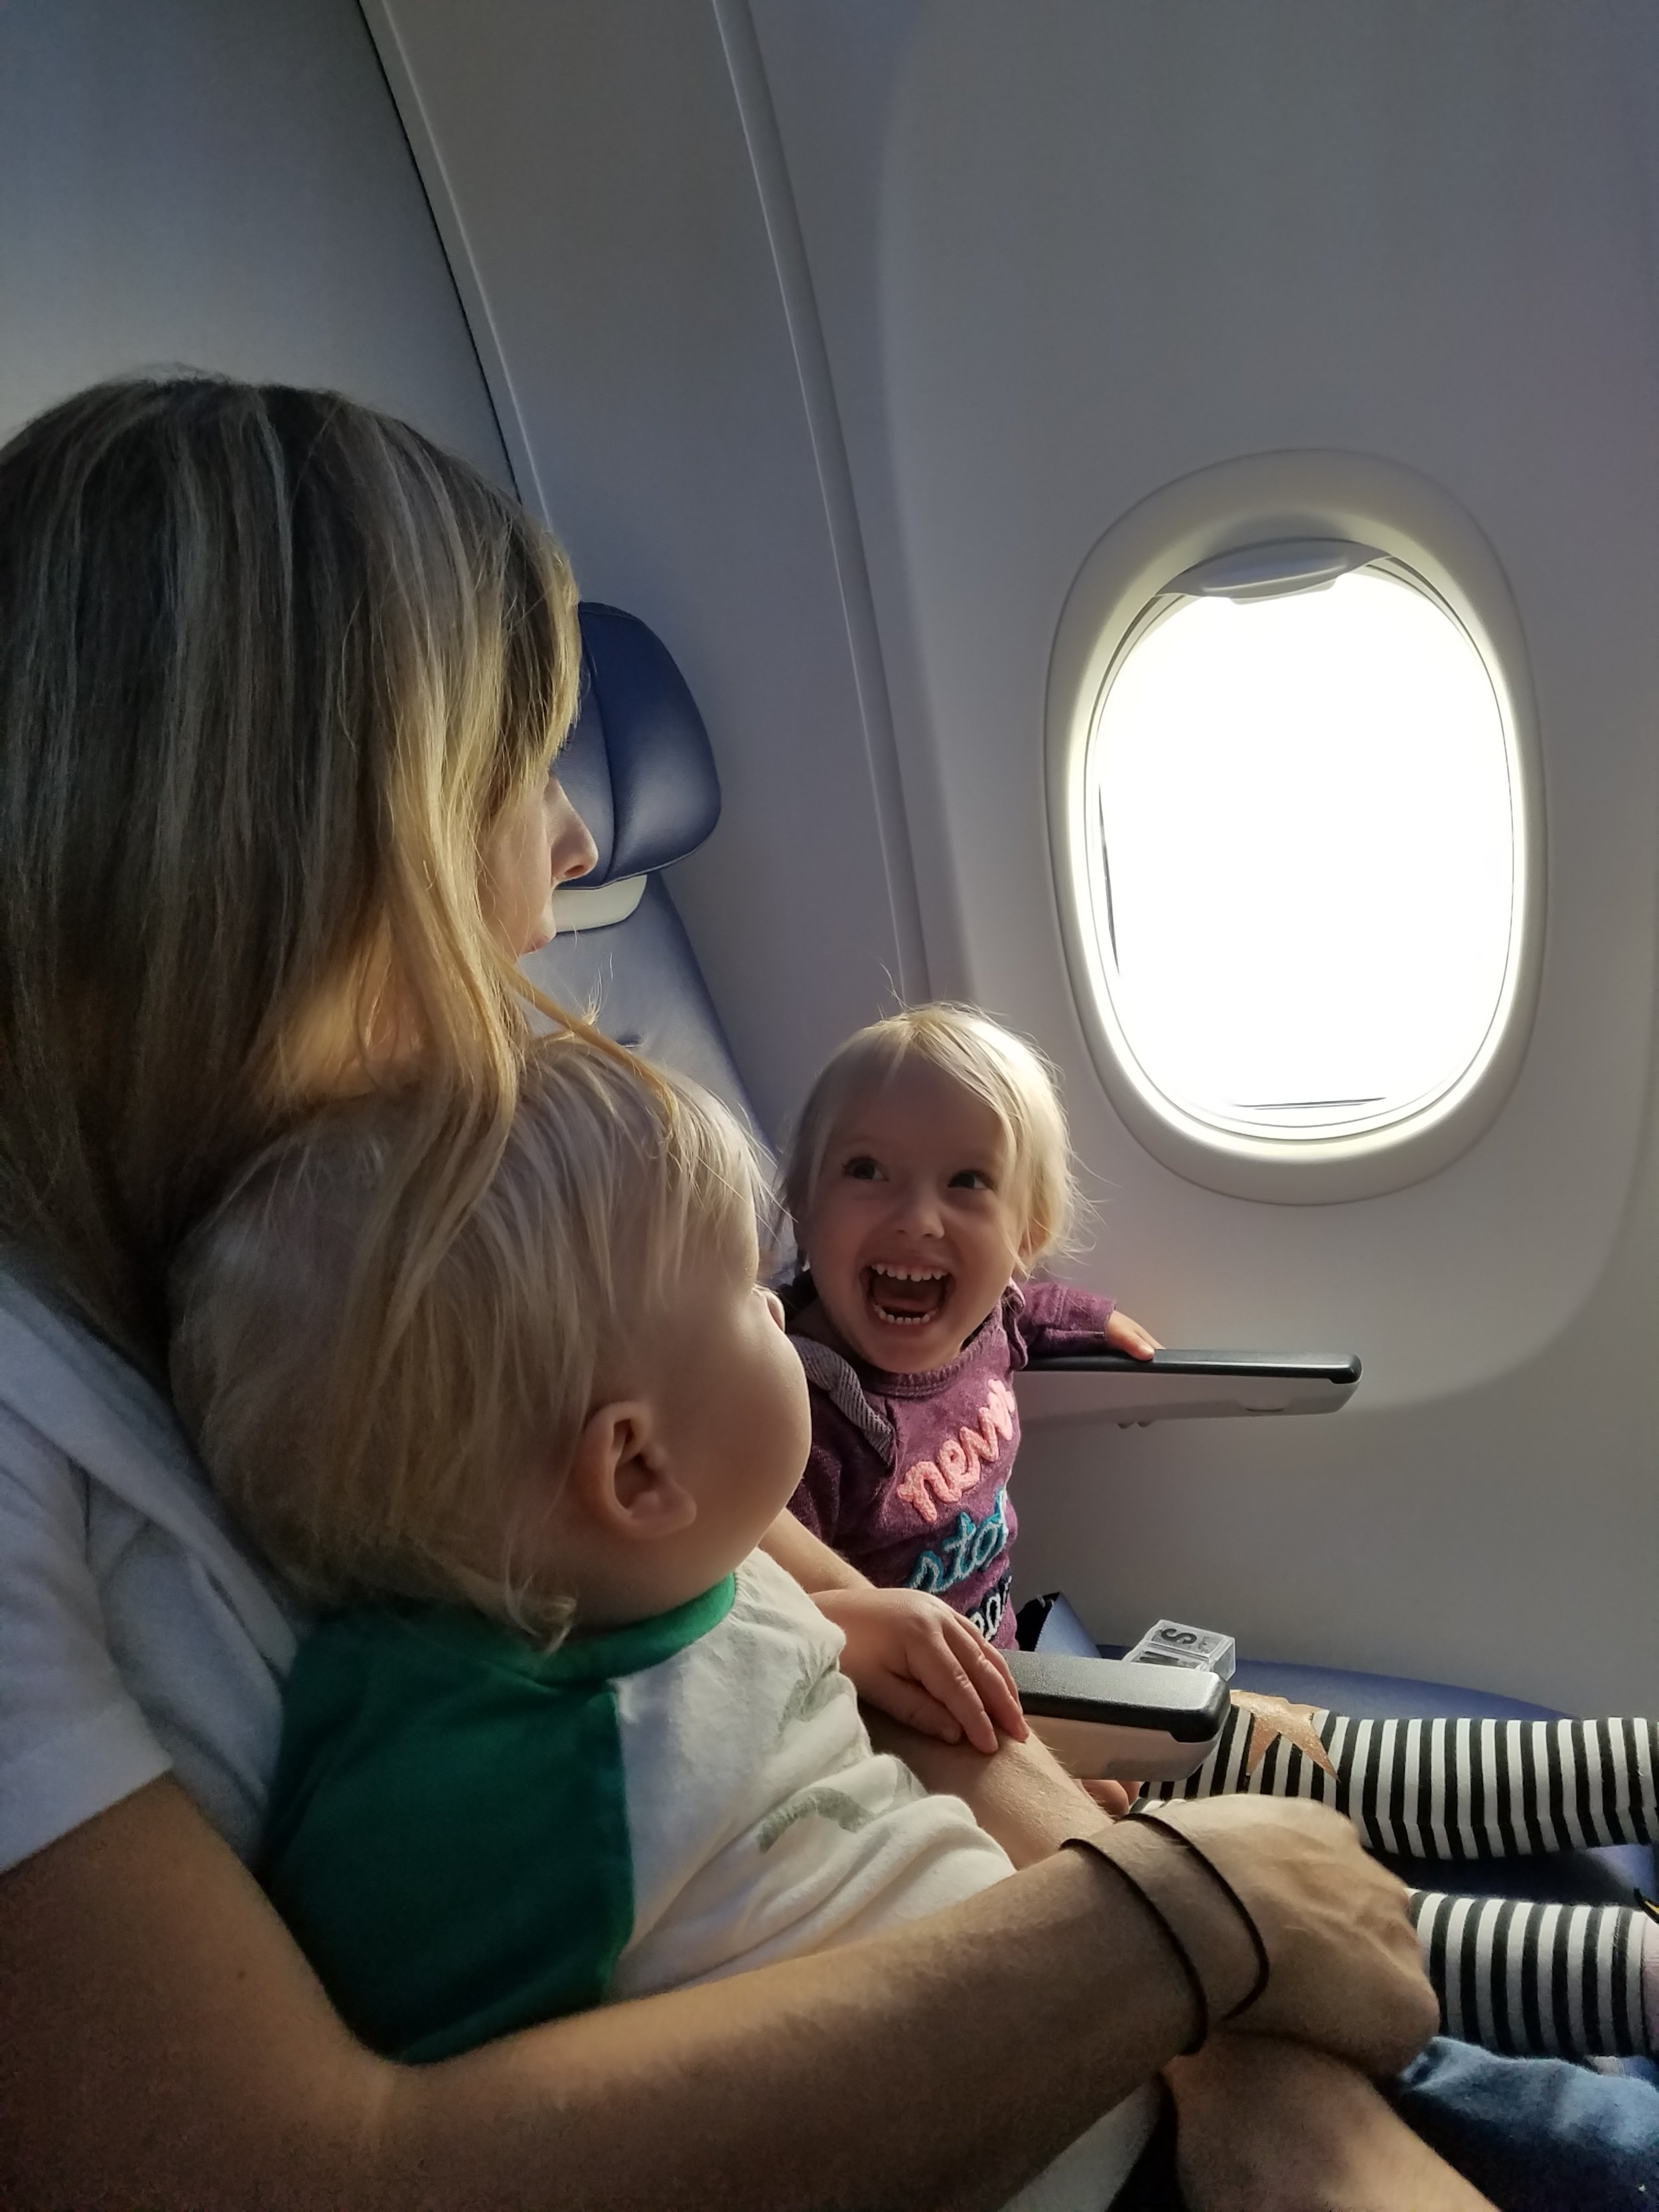 Travel hacks for flying with a toddler